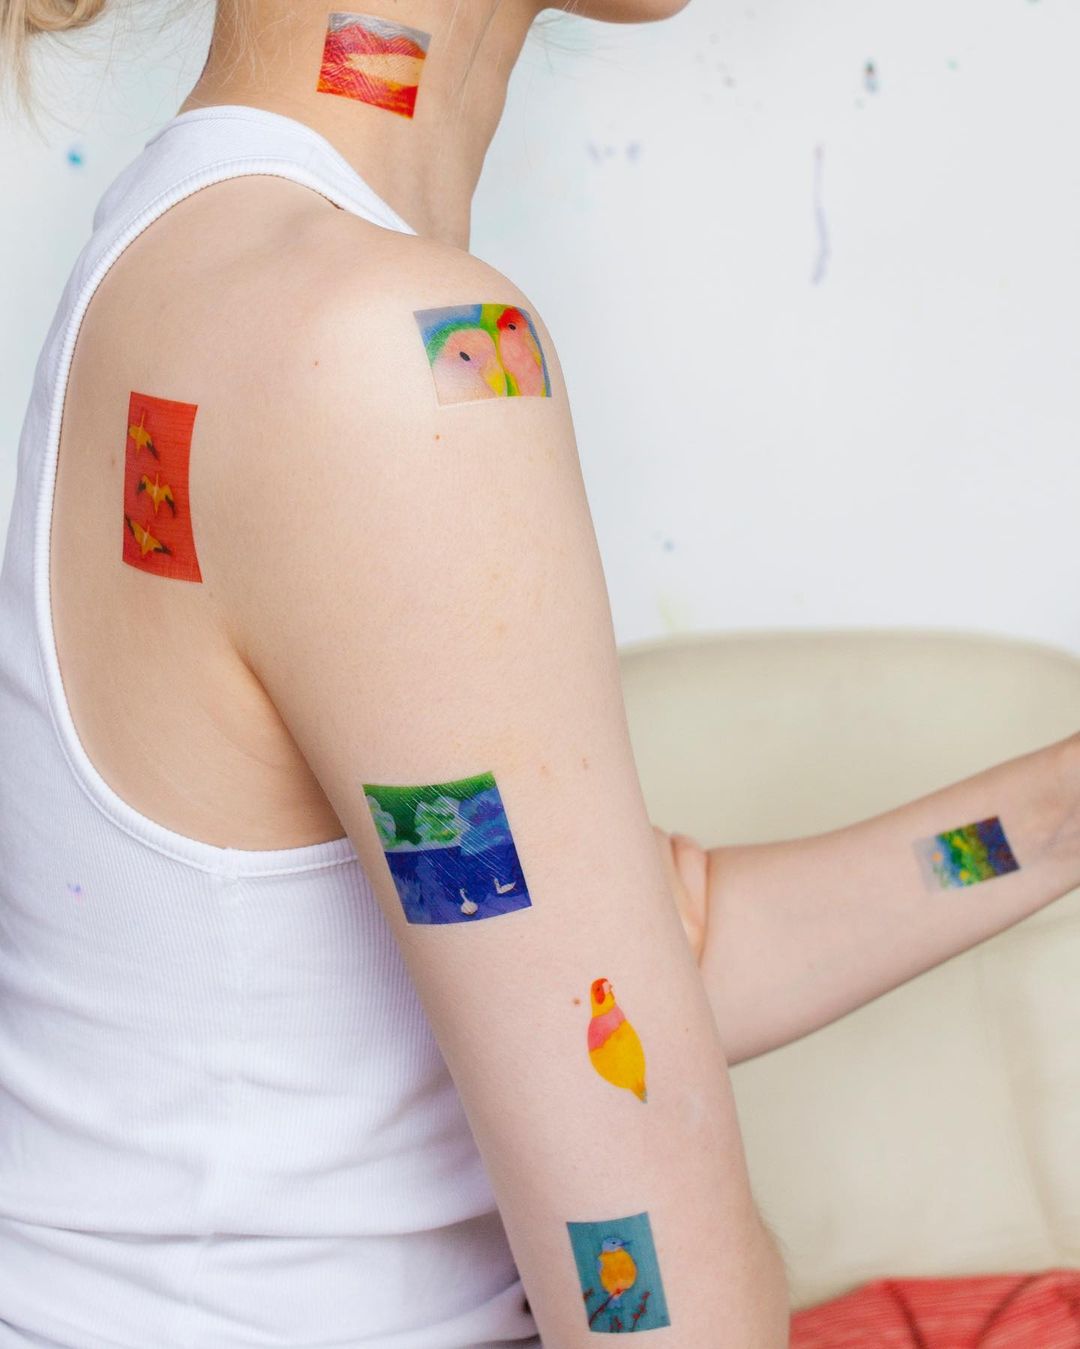 Temporary Tattoos Are More Resilient